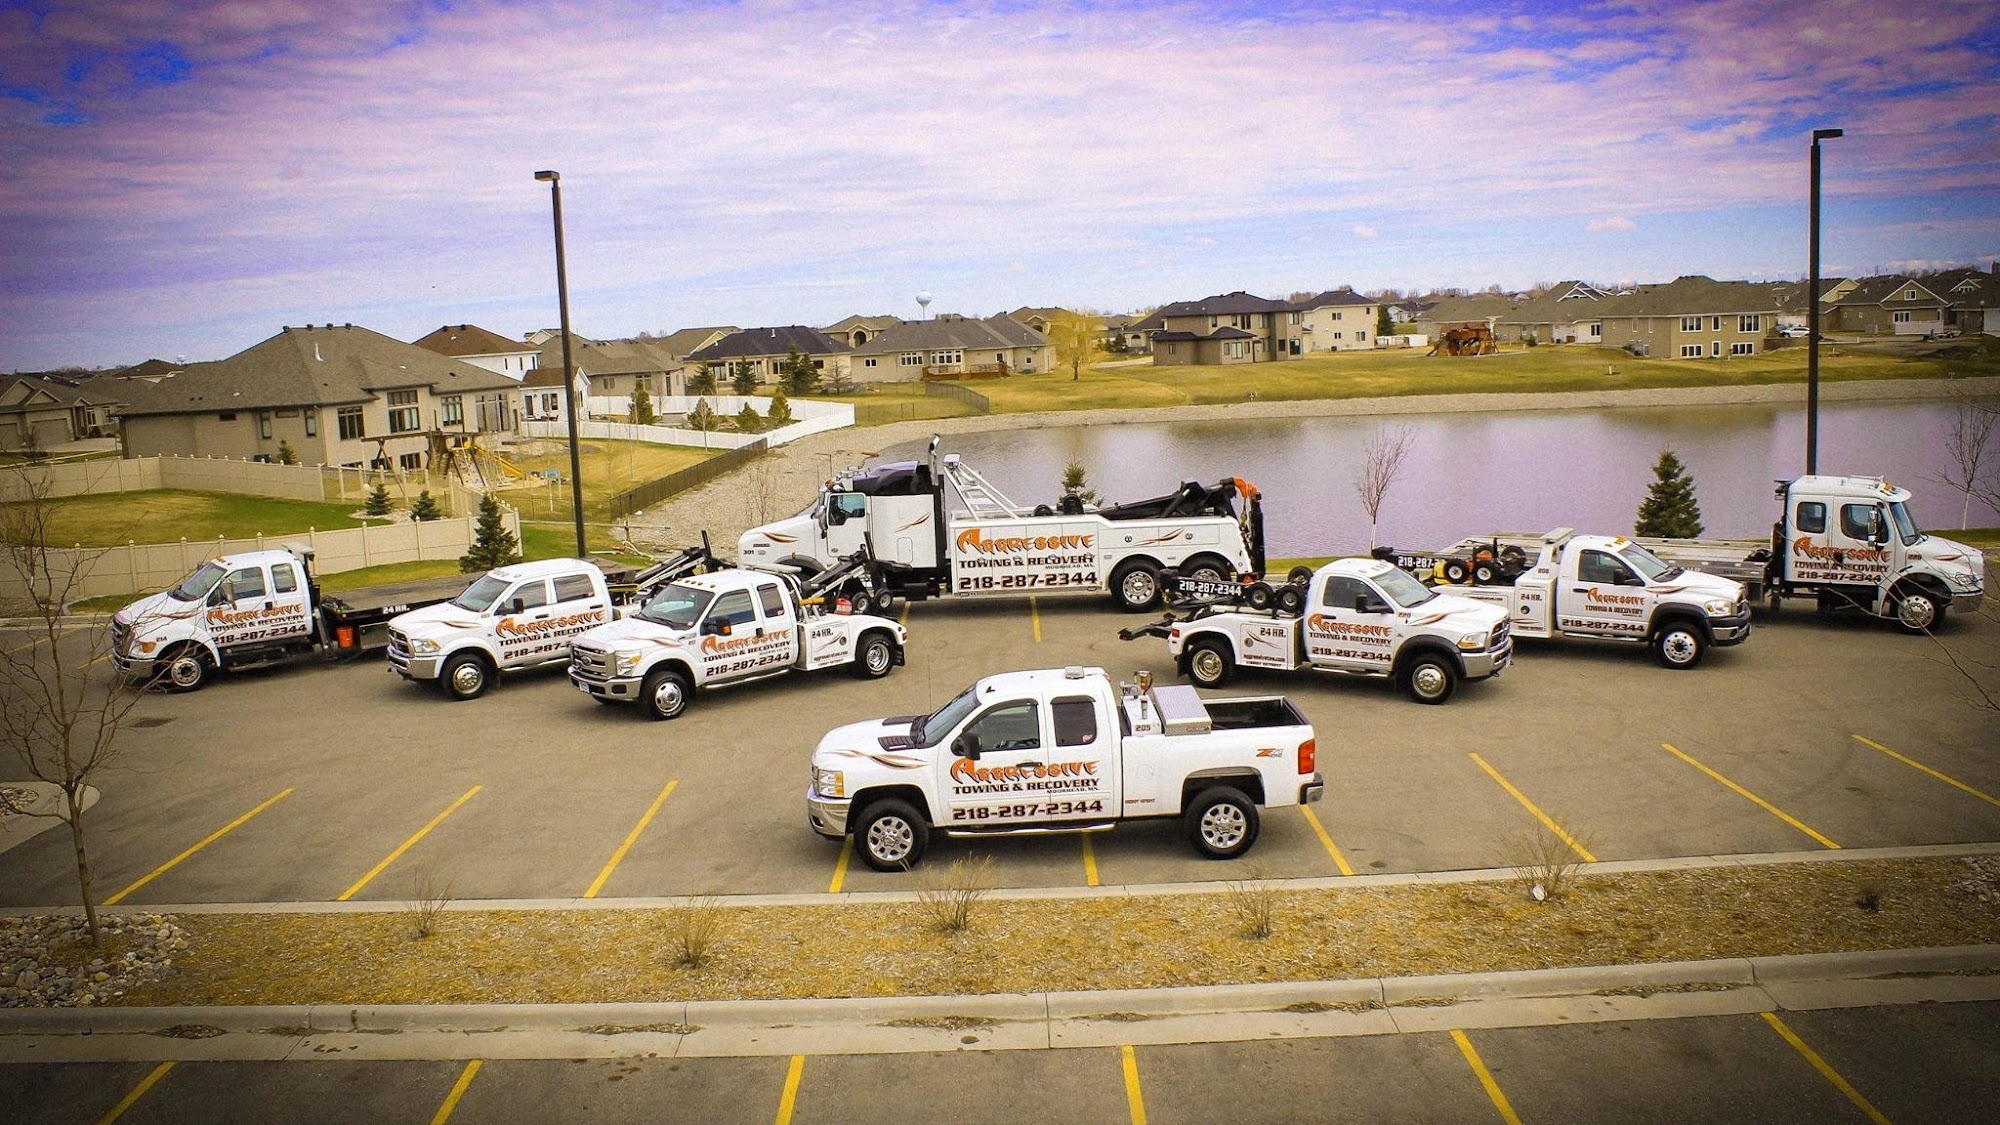 Aggressive Towing & Recovery